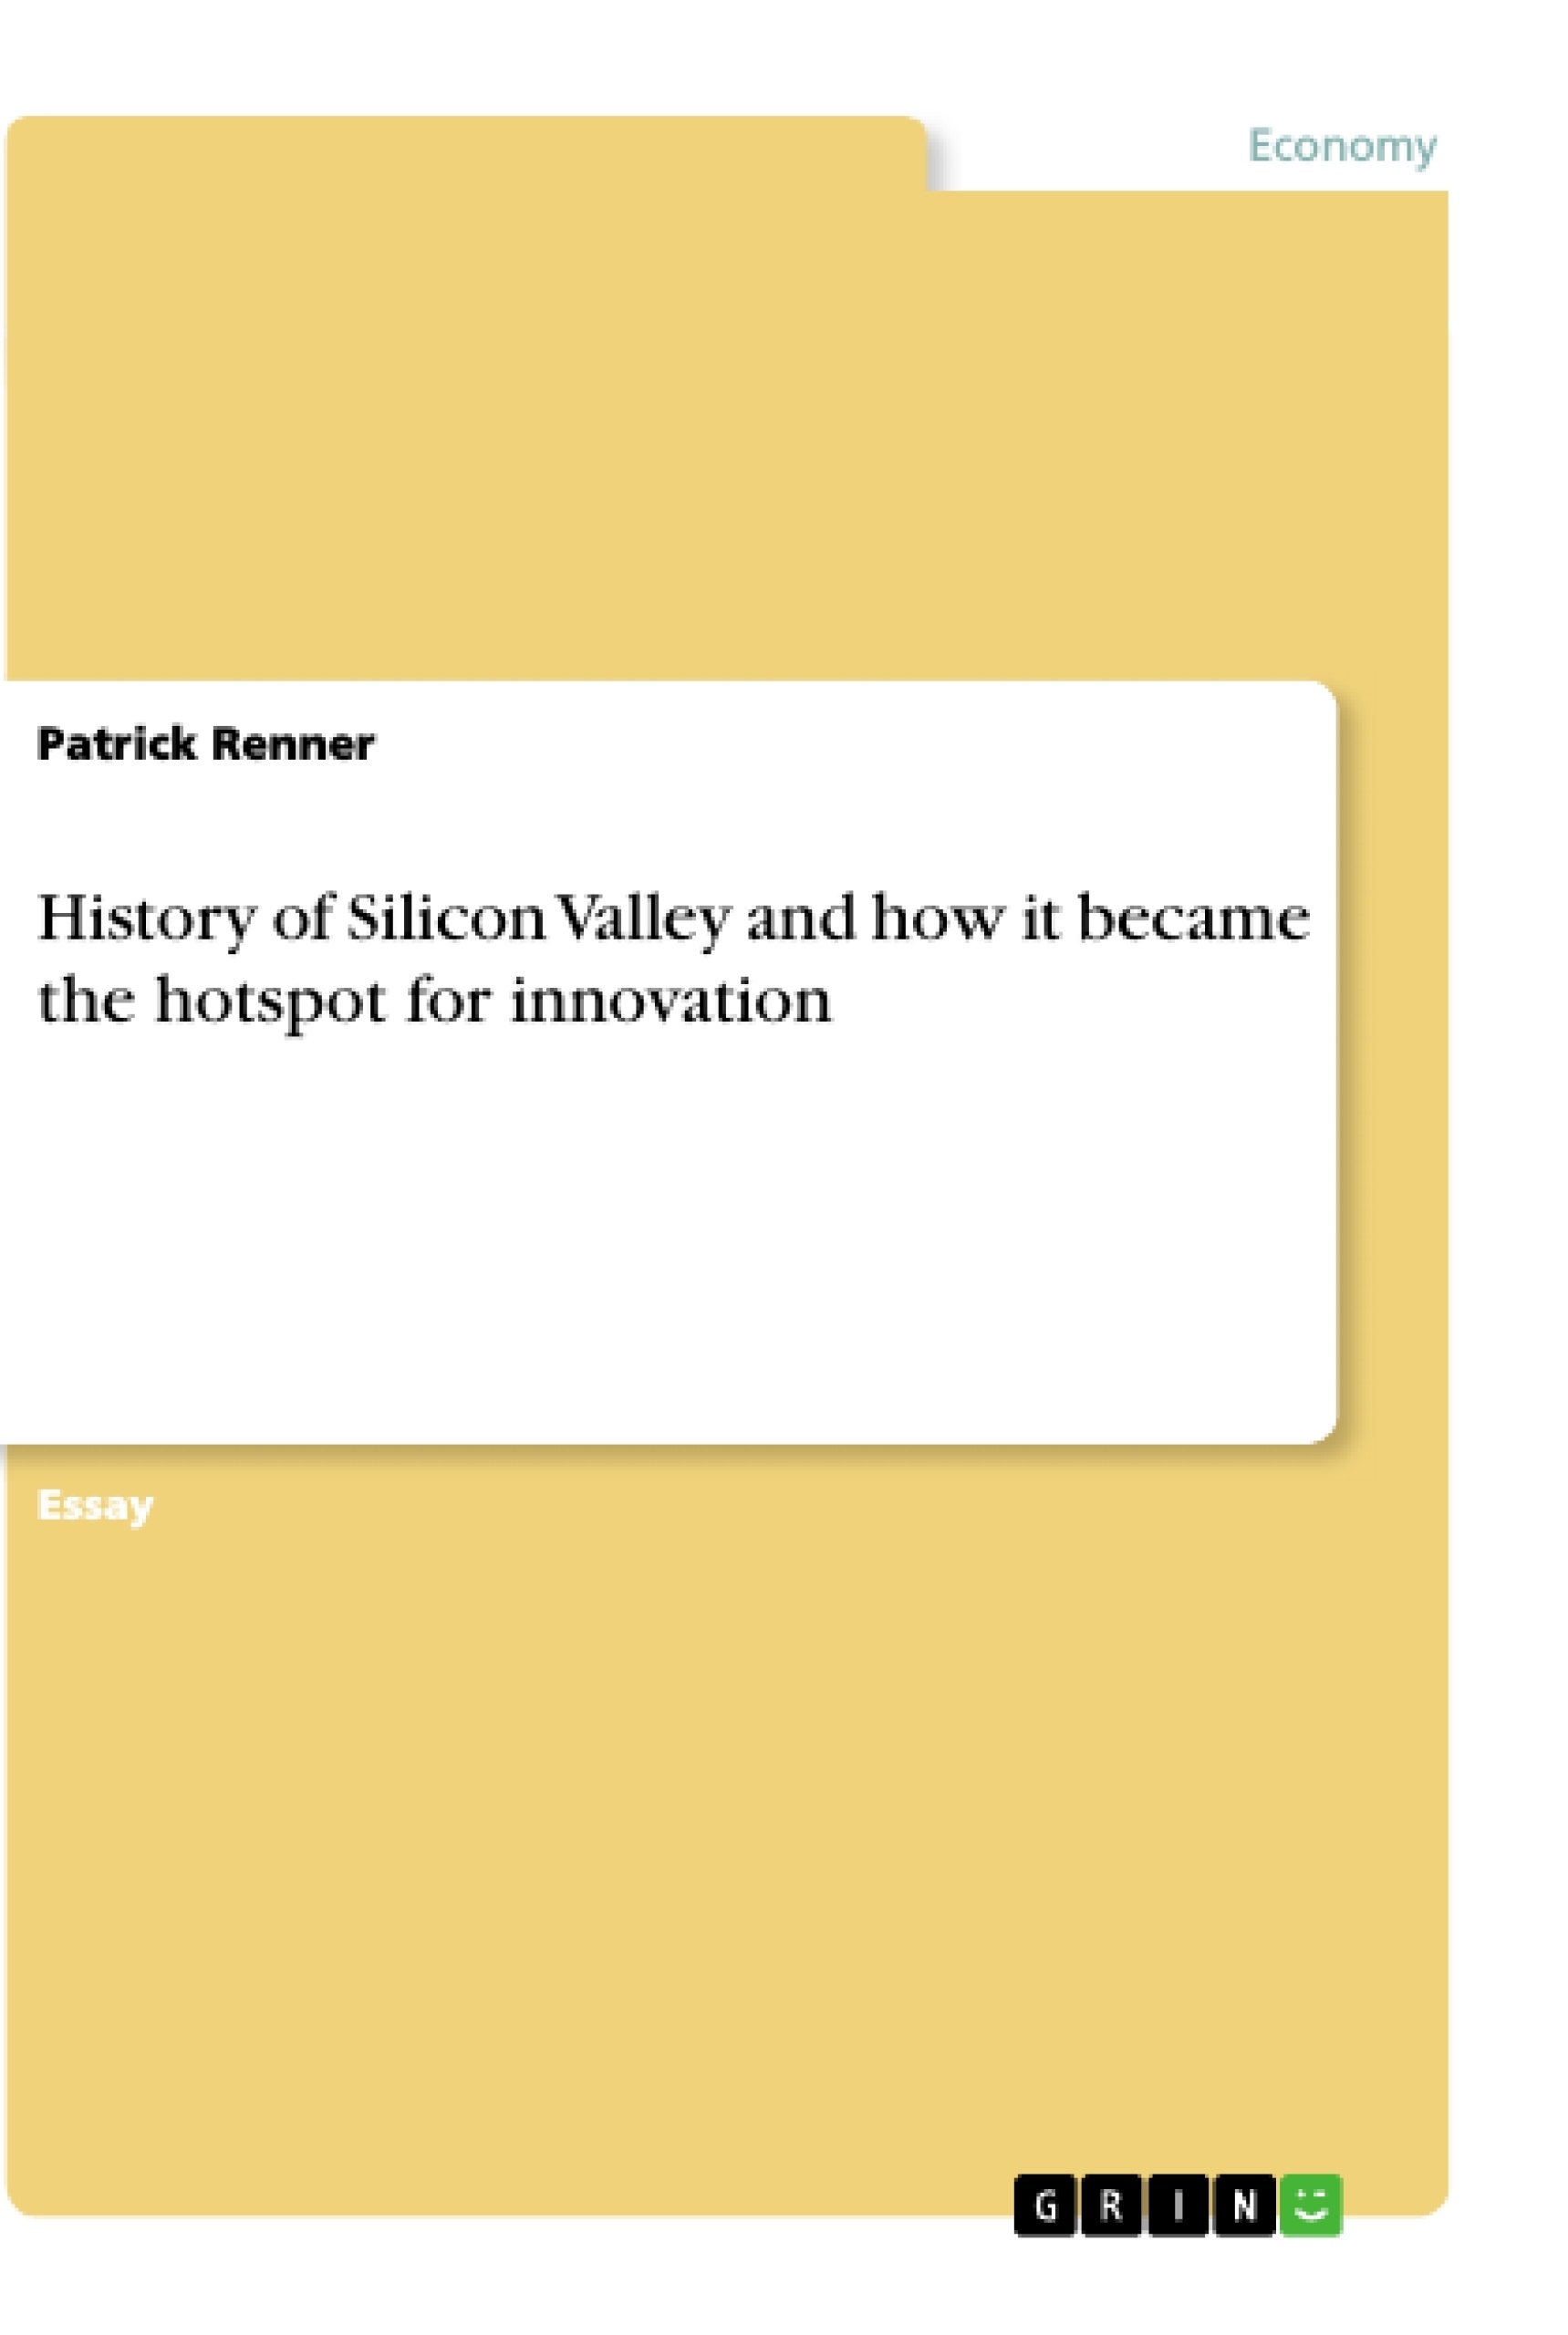 Title: History of Silicon Valley and how it became the hotspot for innovation